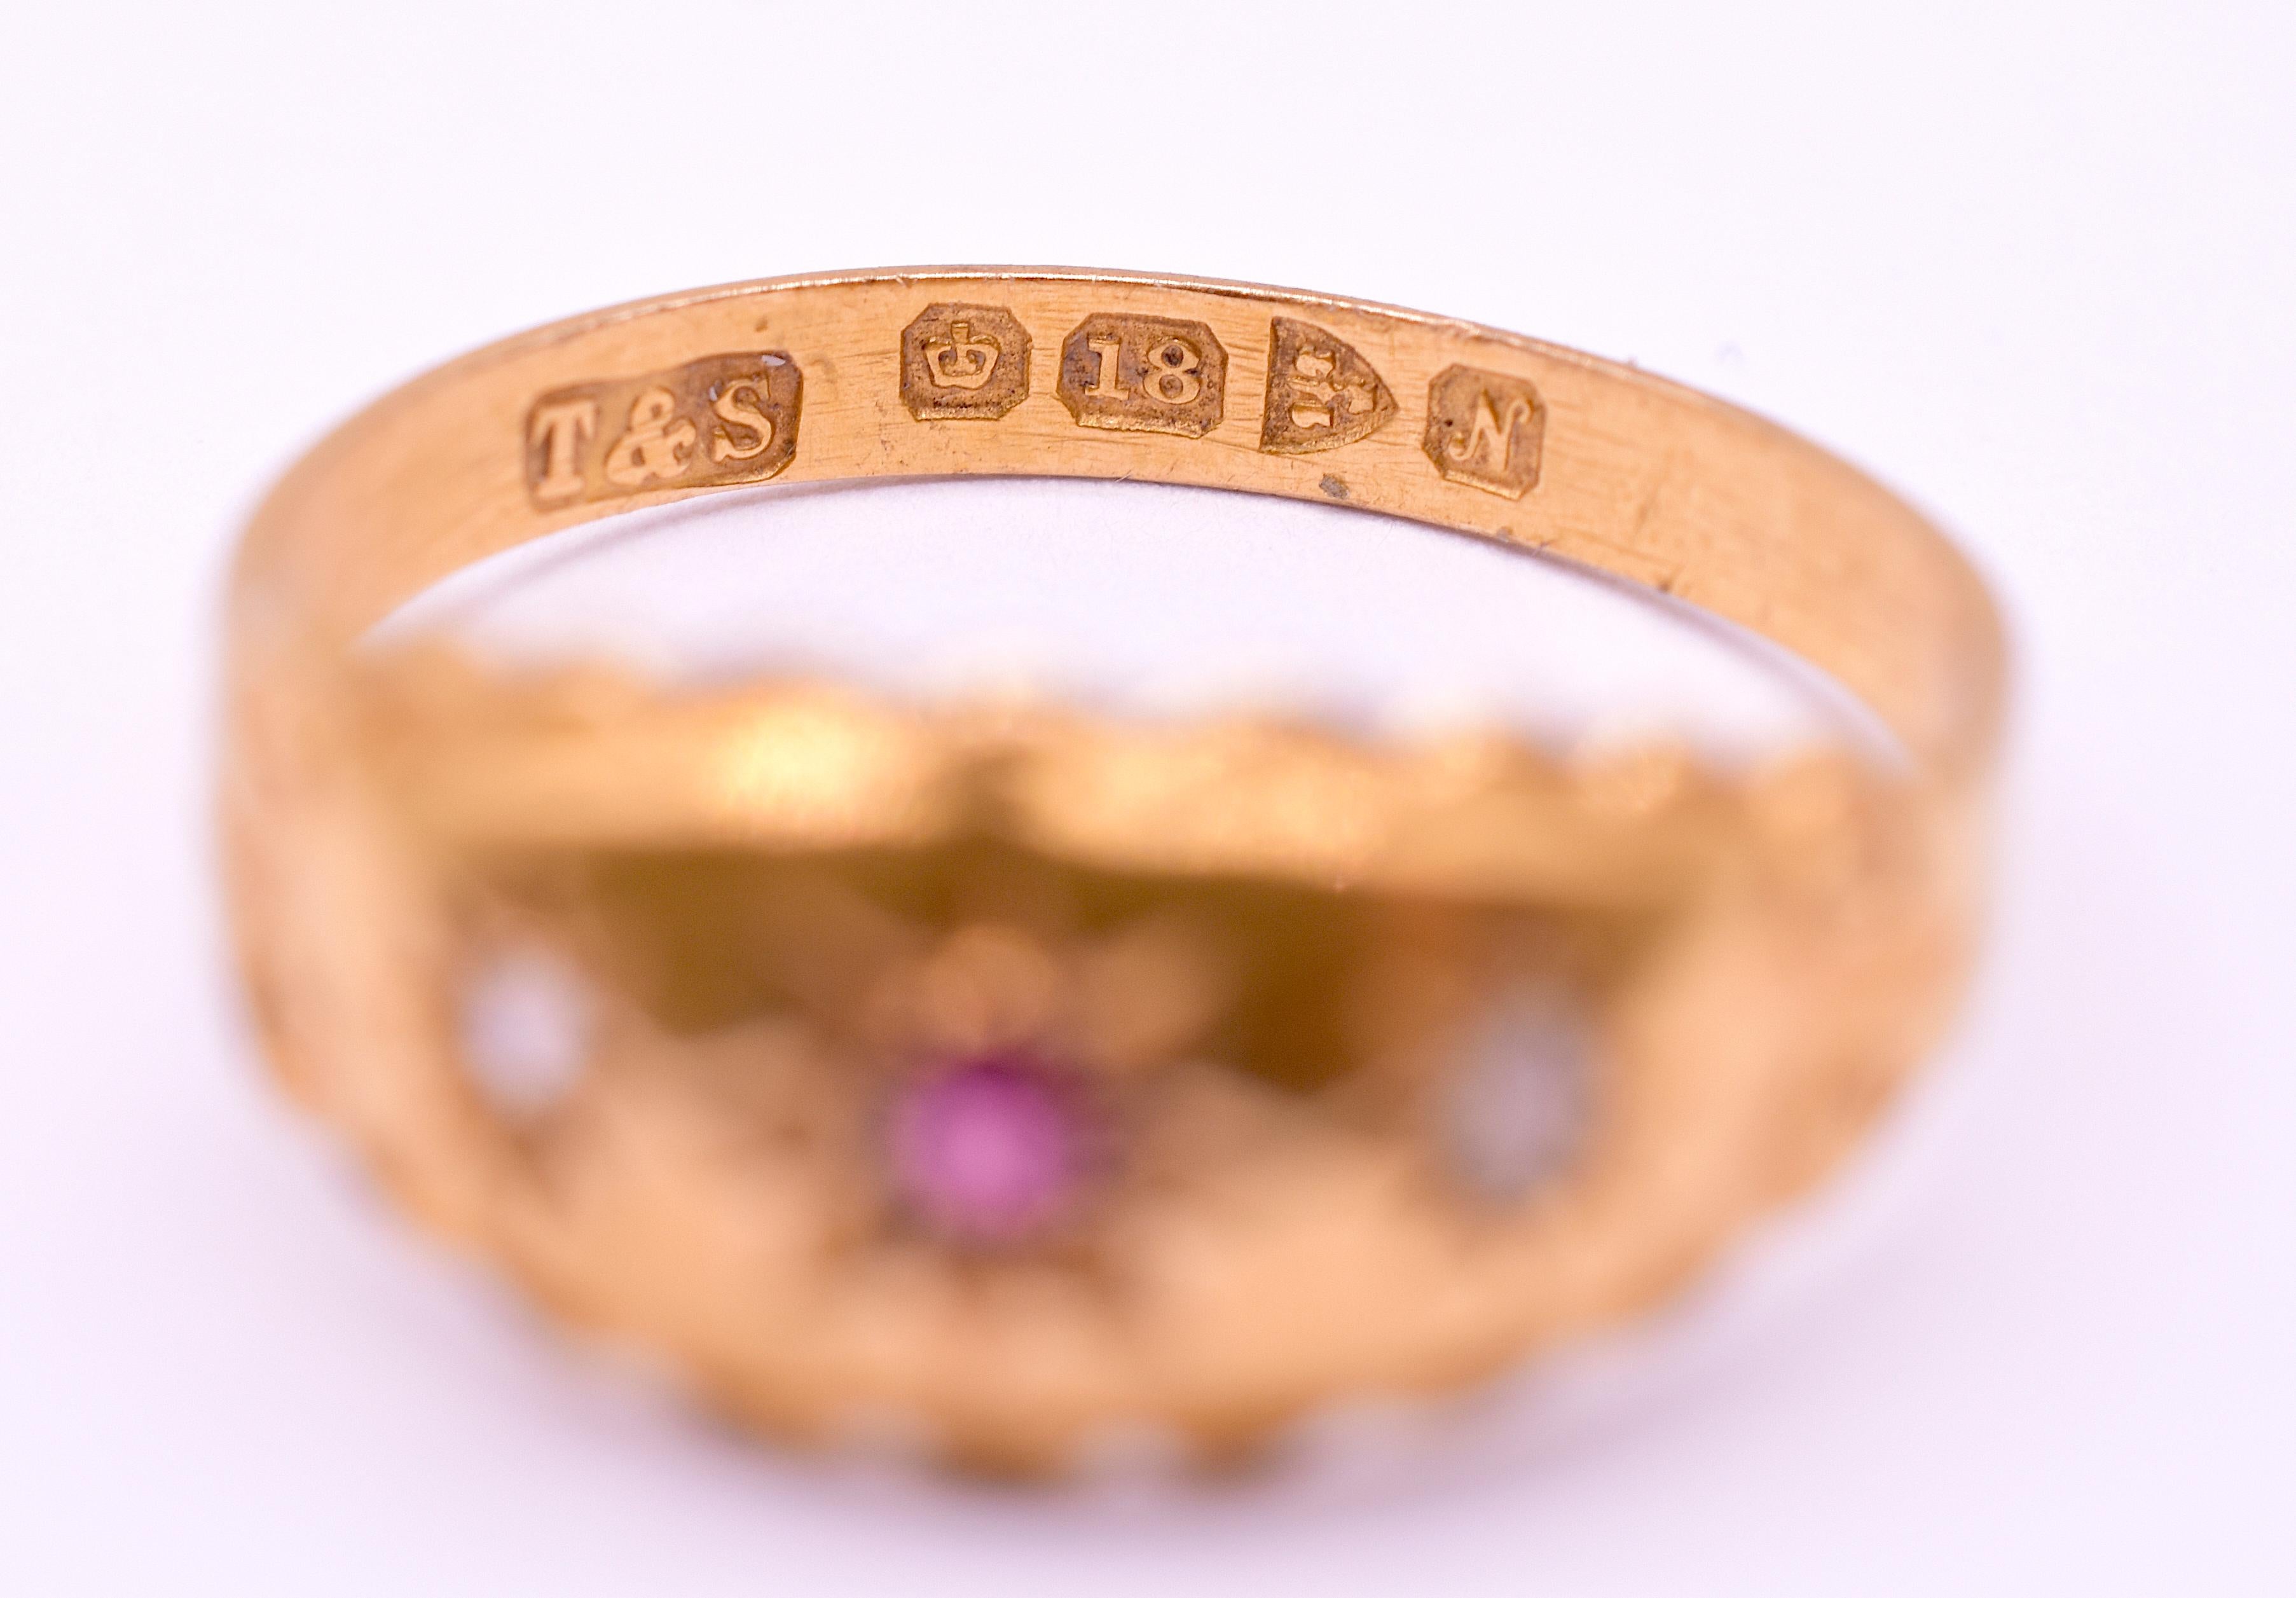 Our 18K flush mount ring features 2 cushion cut diamonds and 1 central ruby encased in 8 pointed stars on a polished gold band with a charming incised design on each shoulder and an unusual scalloped edge. Flush mount gypsy rings are one of the most